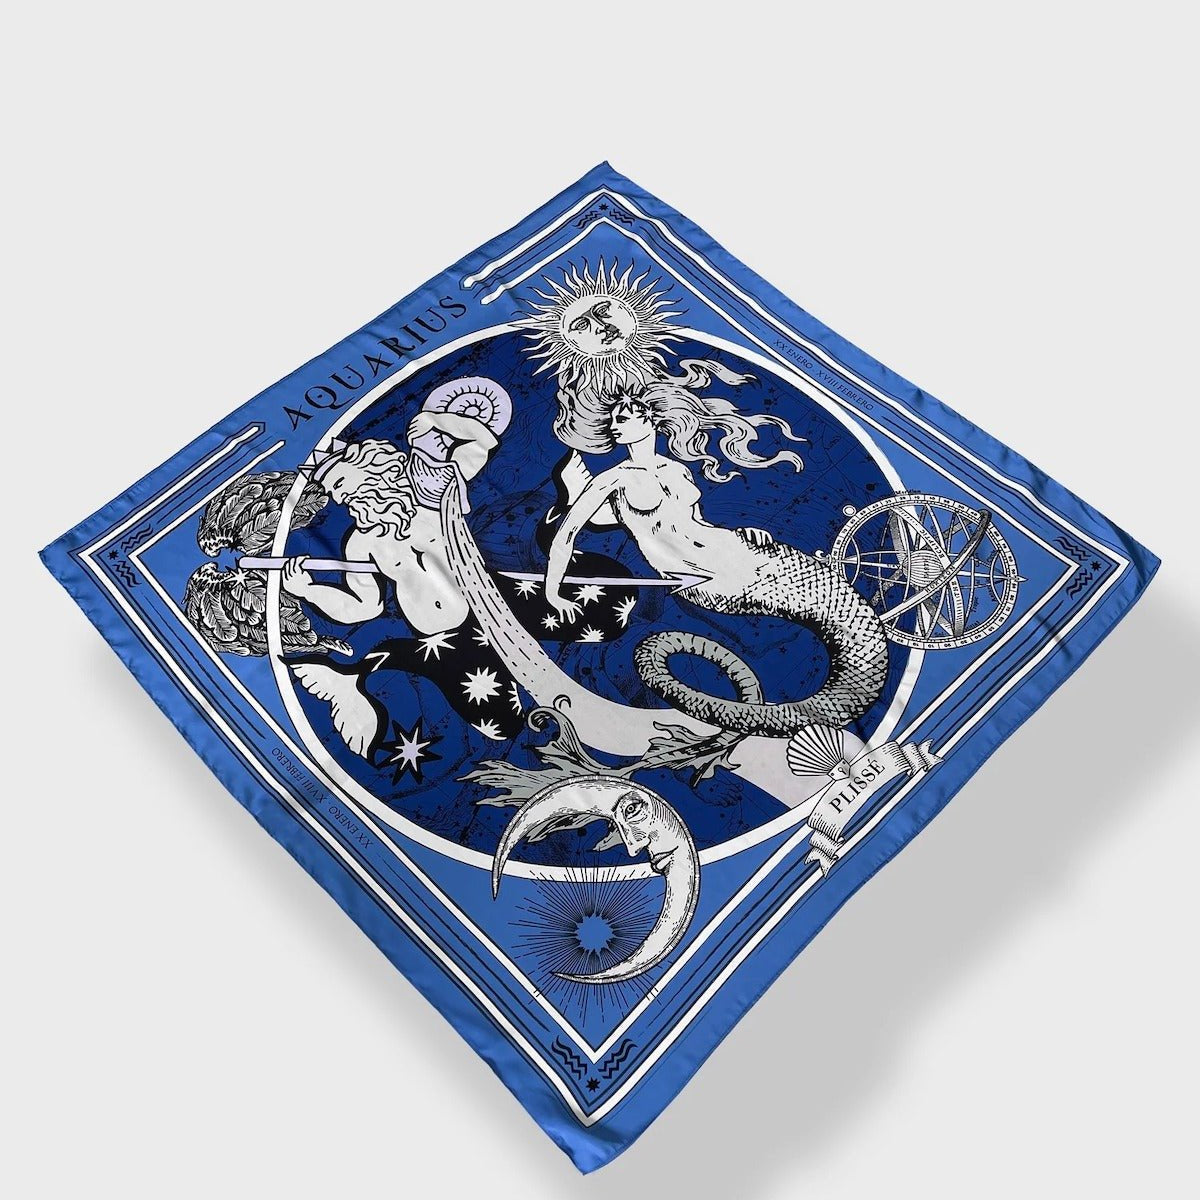 Zodiac Scarf for Aquarius by Plissé. Image of water bearer, mermaid, sun, moon, and the eliptic. The blue scarf is floating on a white background.